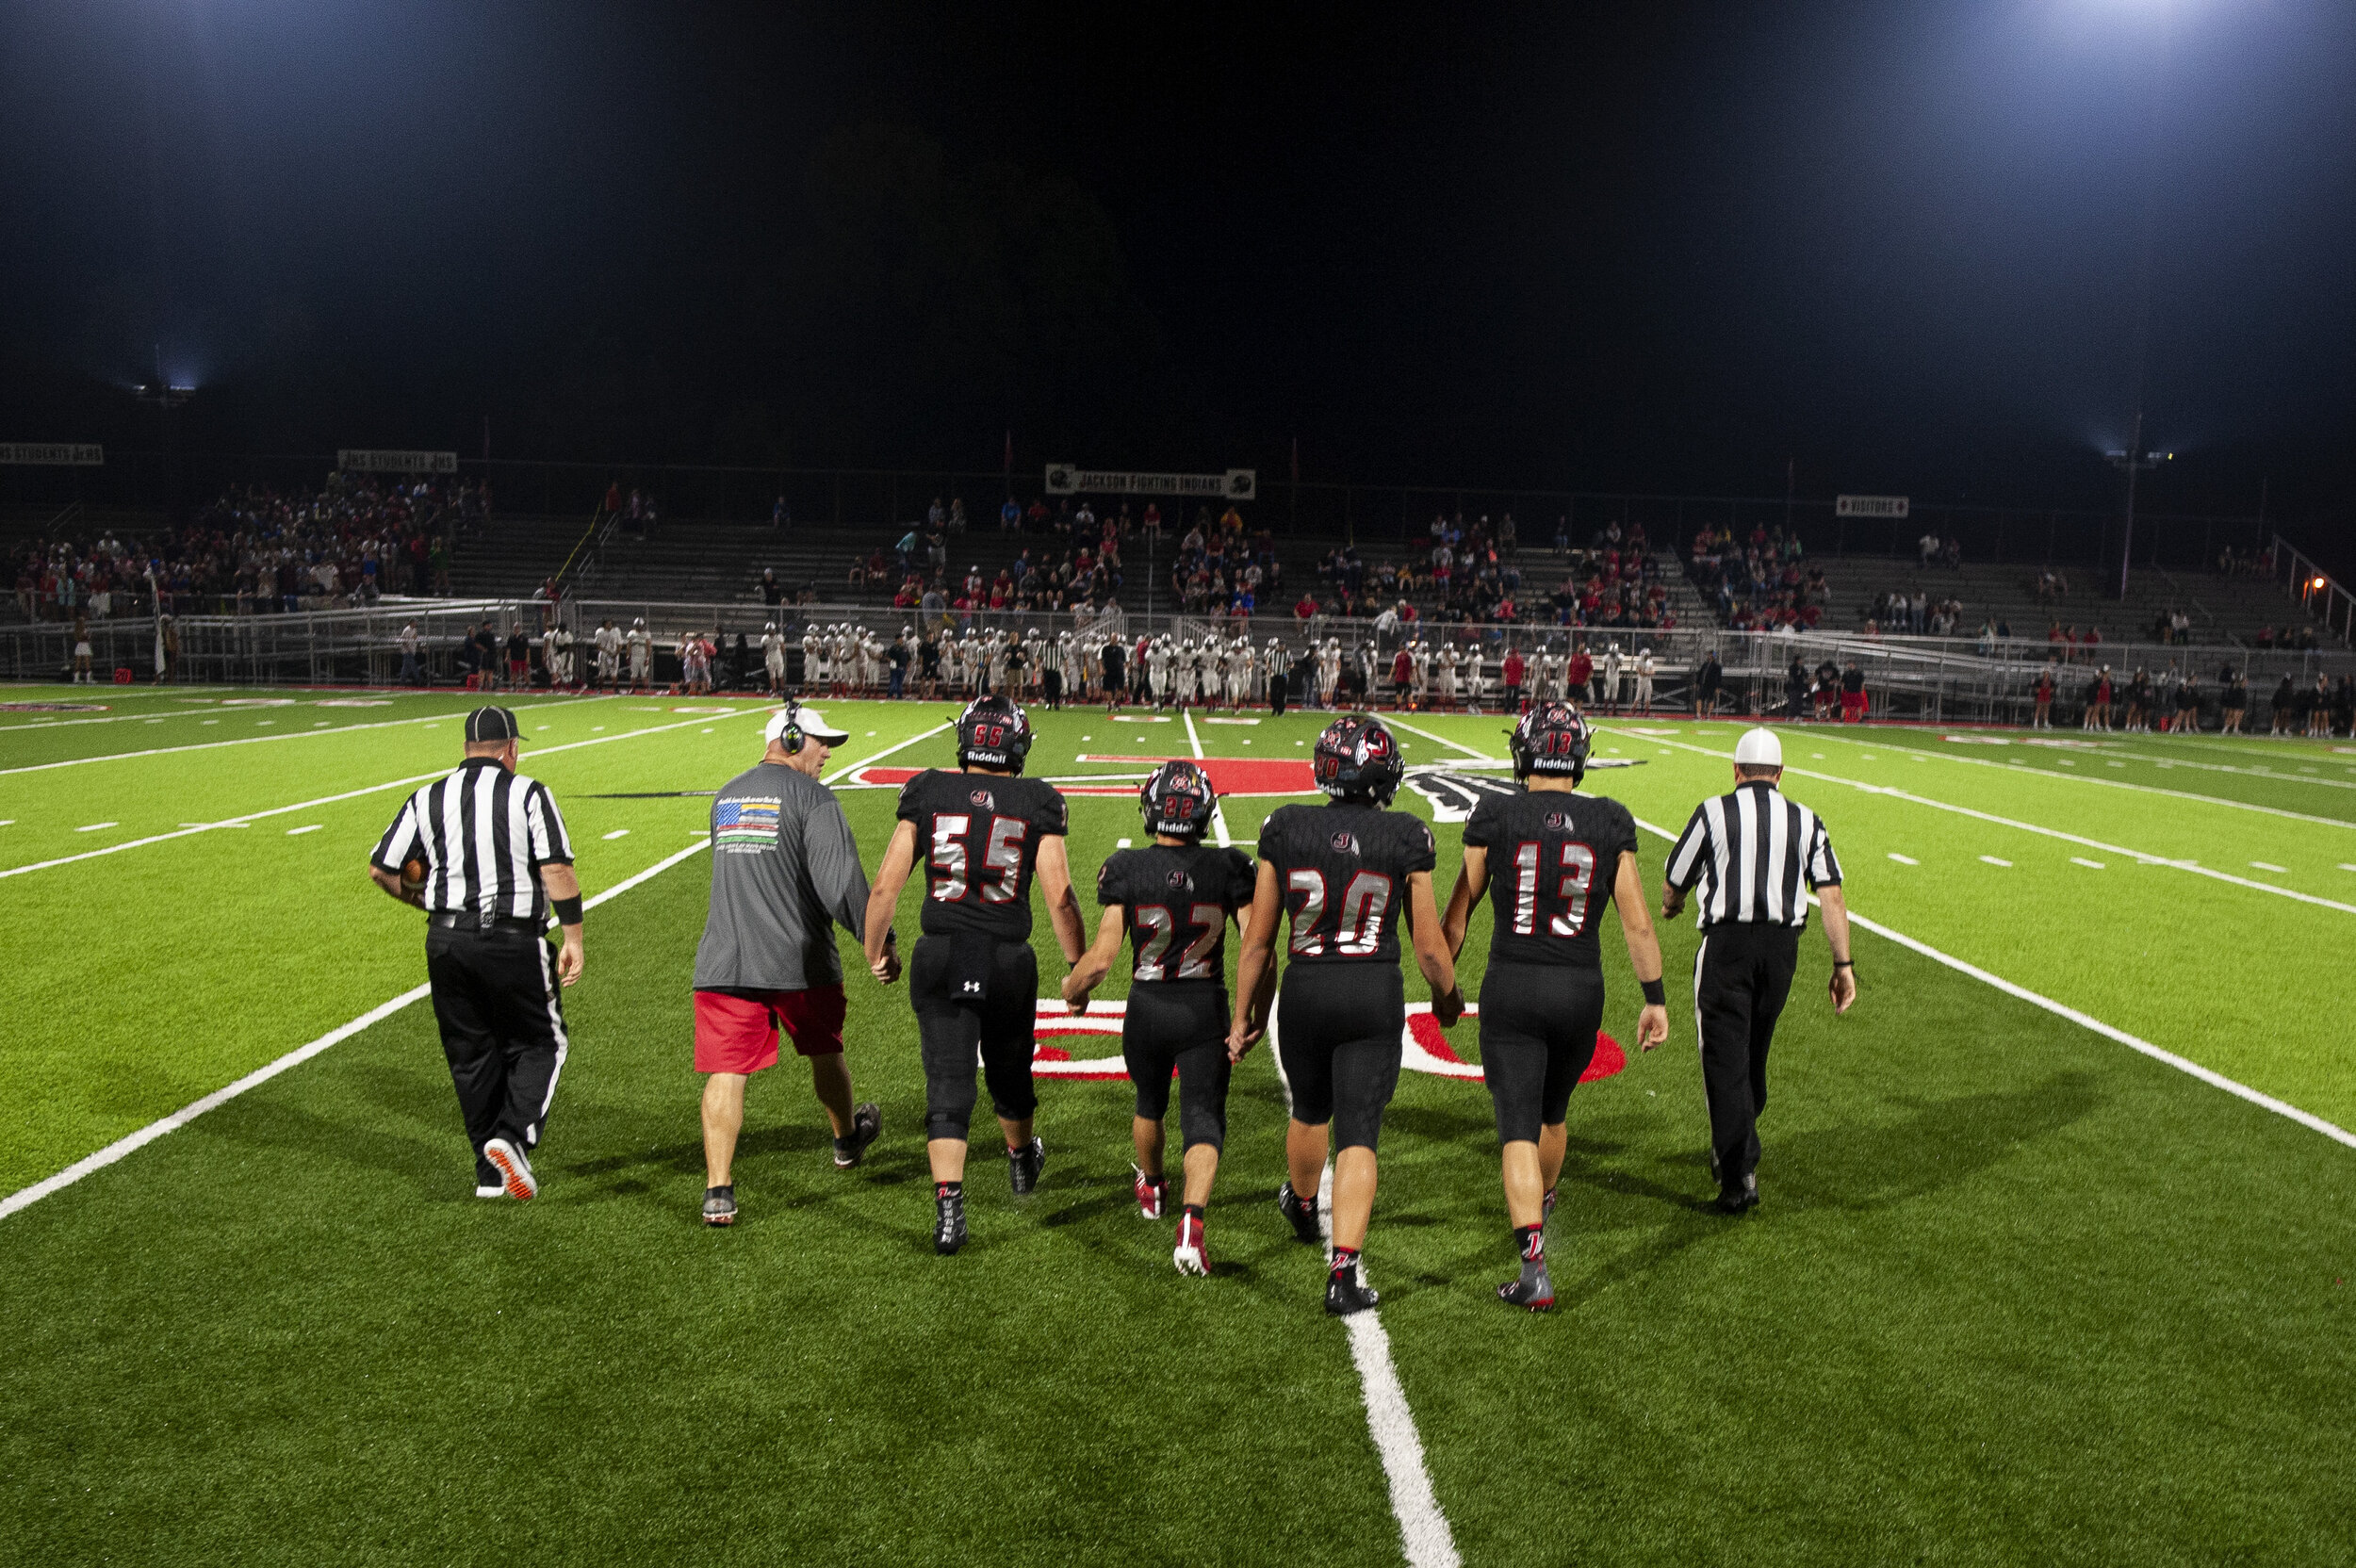  Jackson Indians take the field before the start of their matchup against the Sikeston Bulldogs on Friday, Sept. 20, 2019, in Jackson. Jackson defeated Sikeston 53-0.  